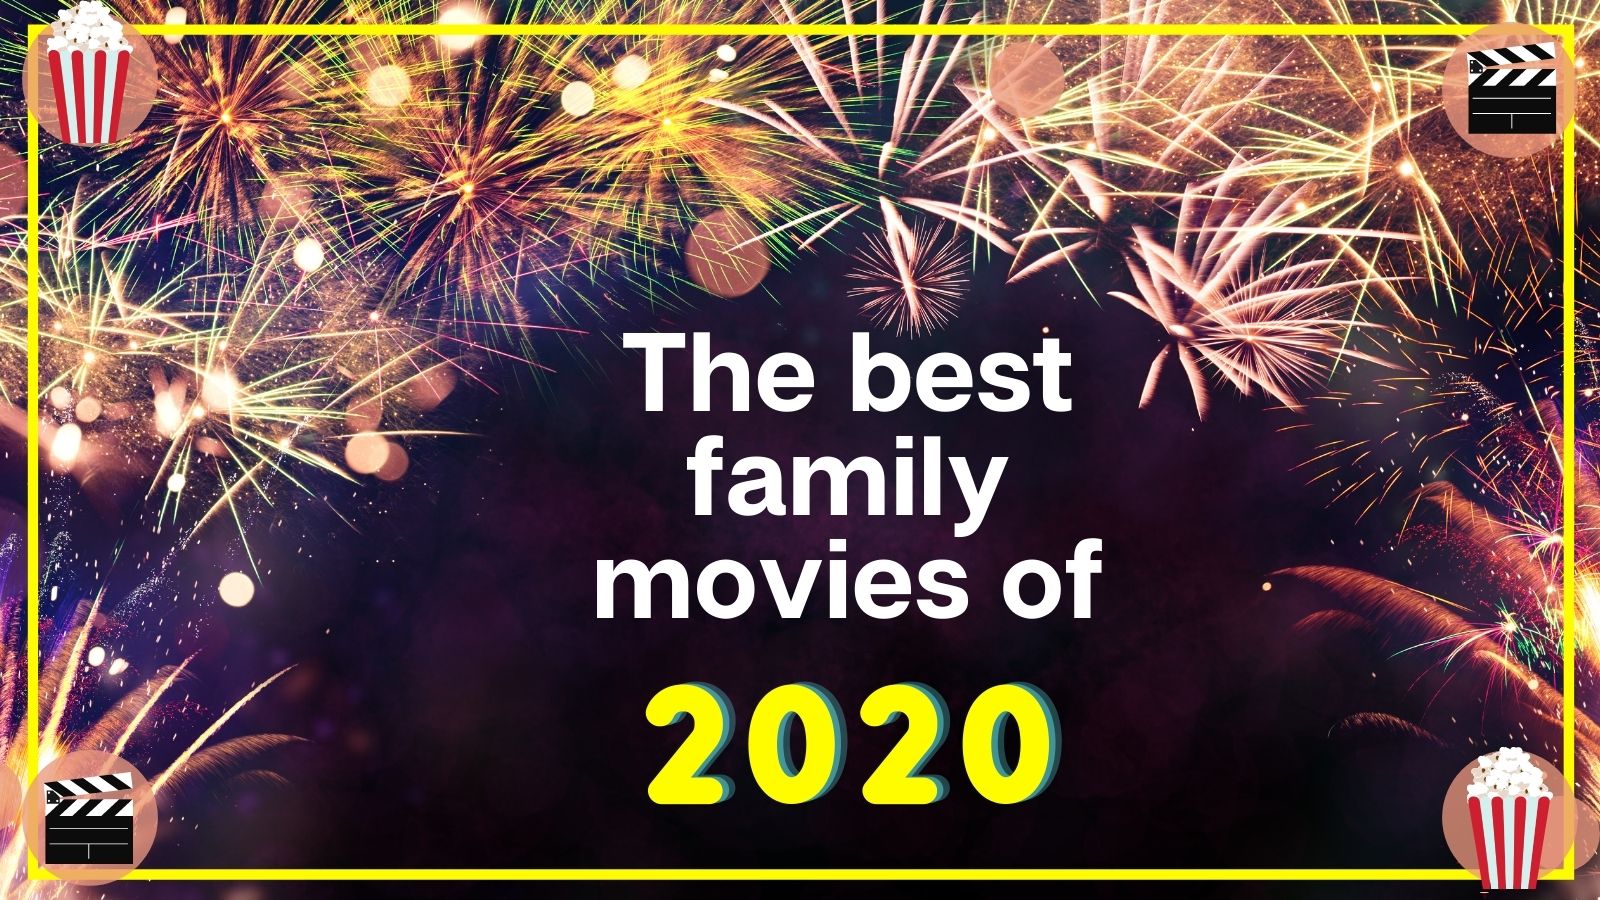 Family Movies Coming Out in 2021 and the Best Family Movies from 2020